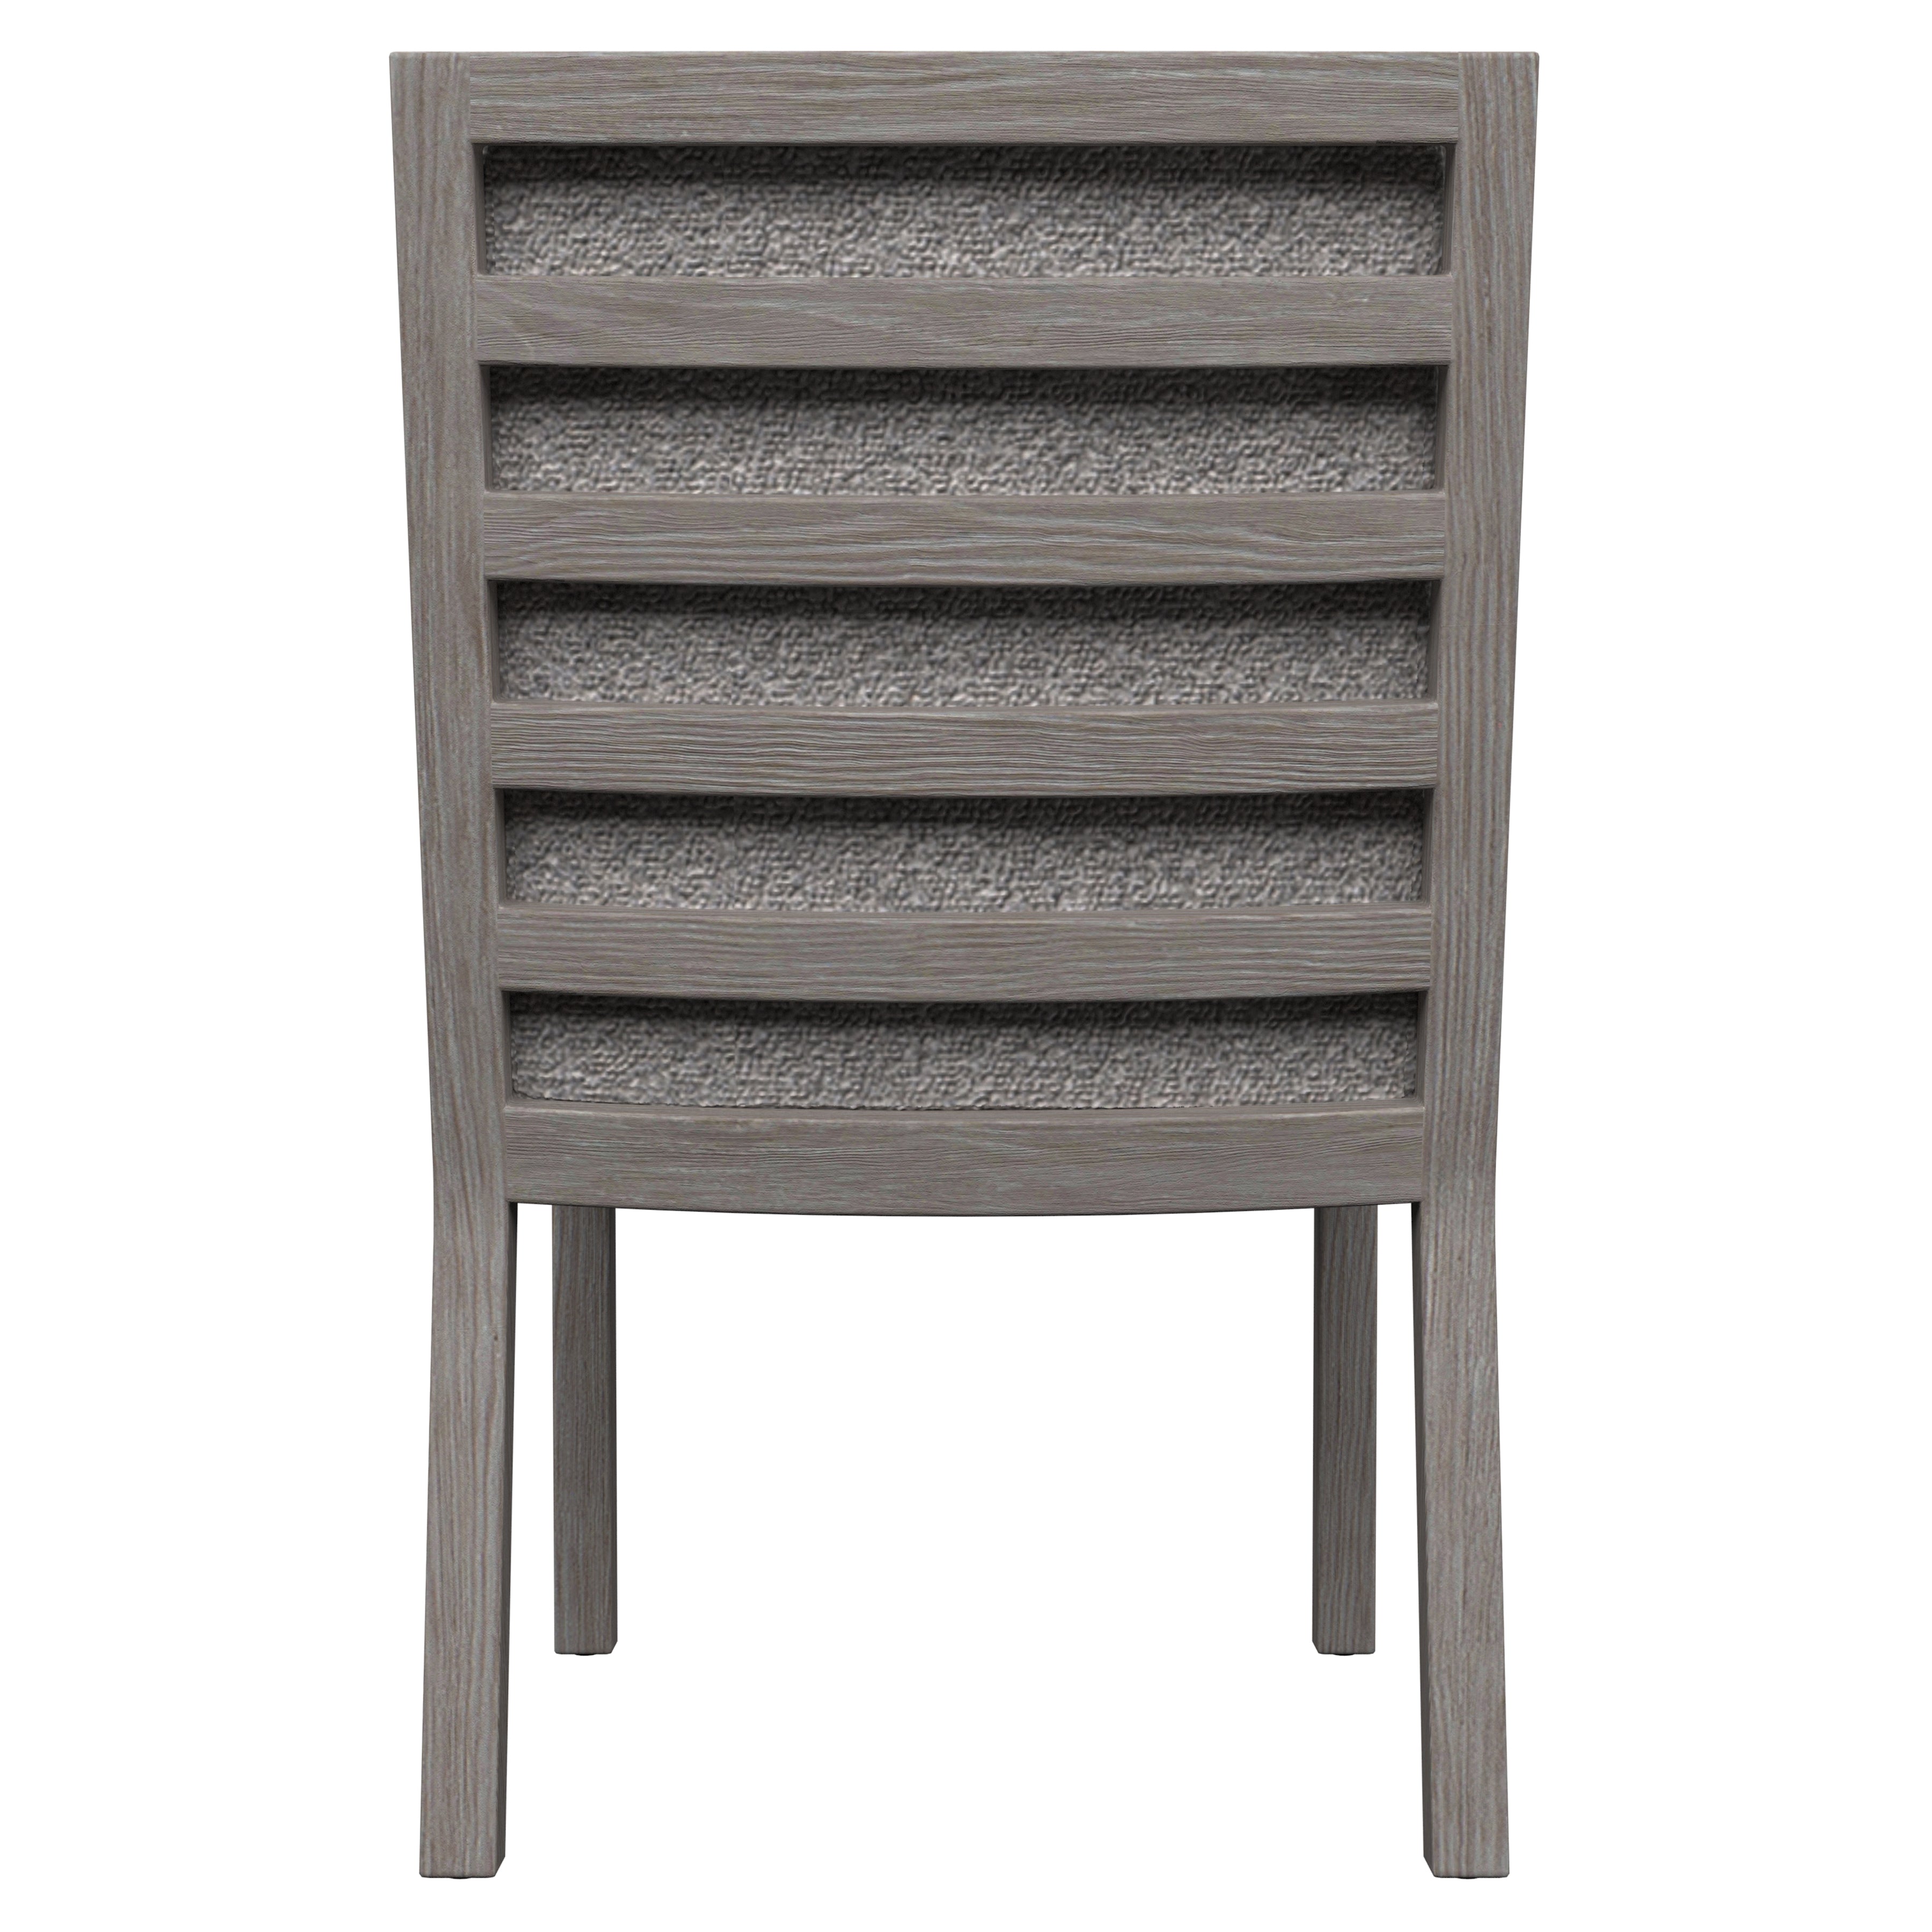 Trianon Ladderback Side Chair in Gris Finish